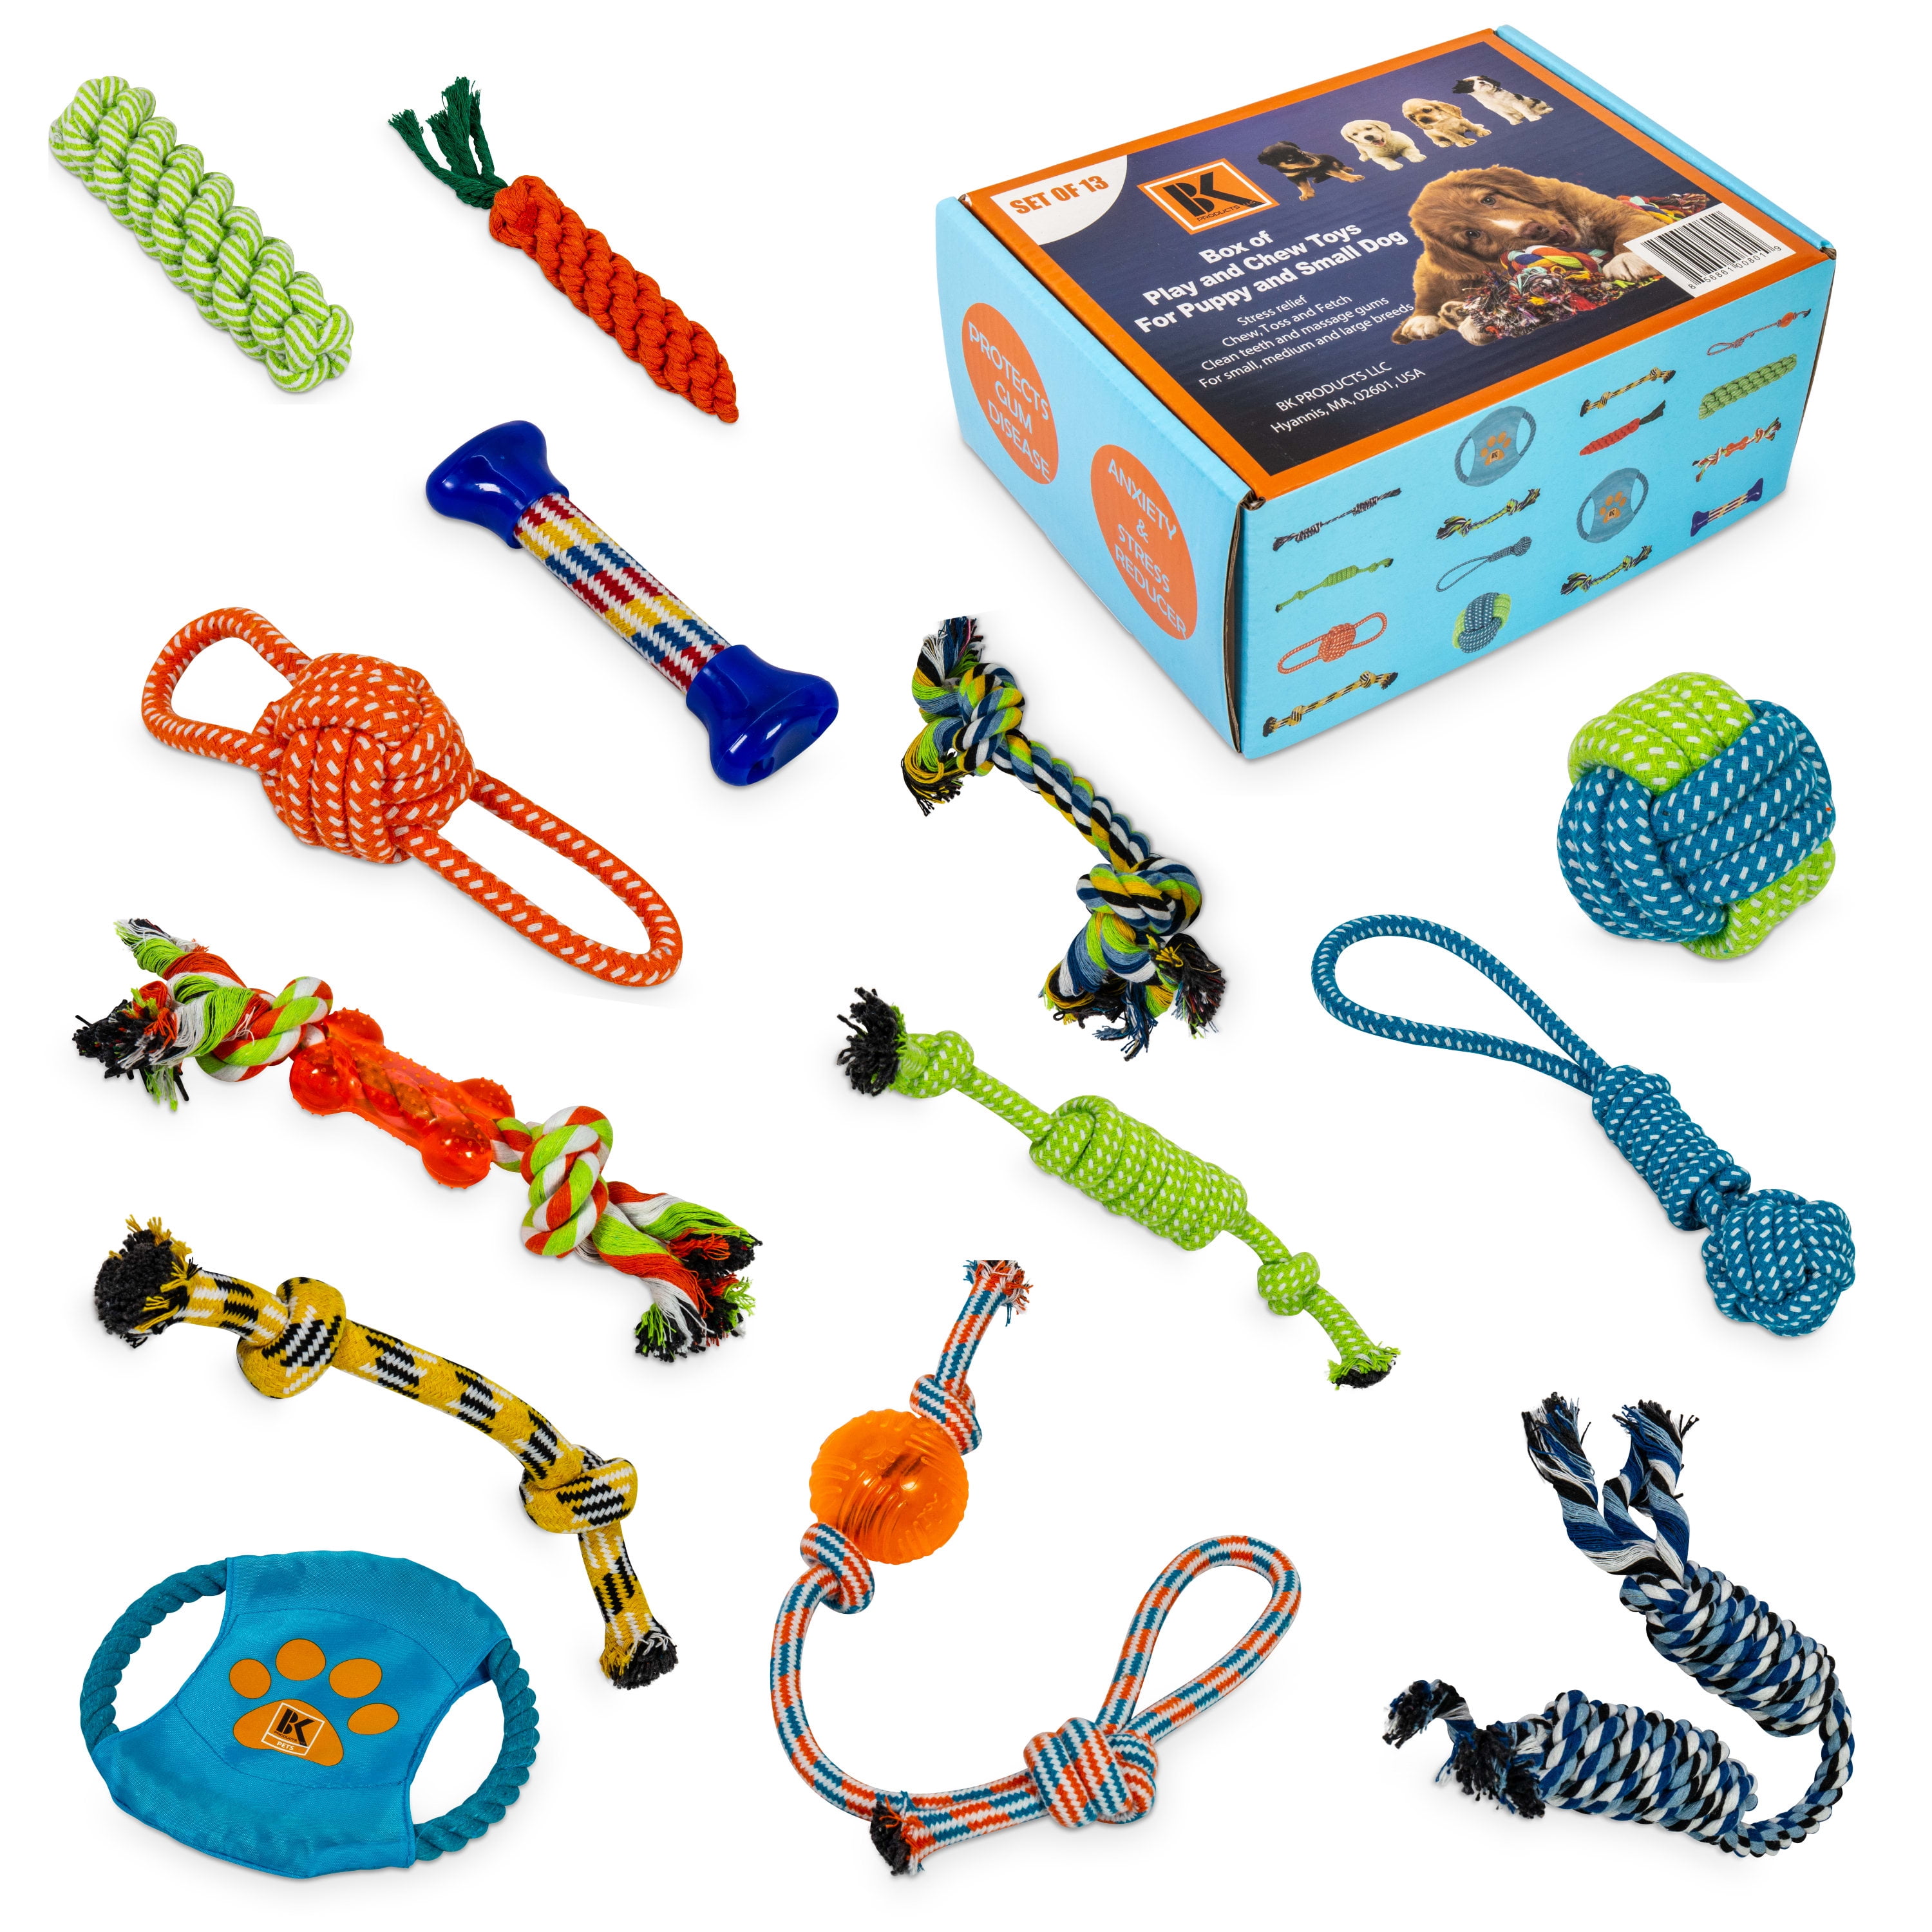 Dog Toys for Small Dogs and Medium Dogs Dog Rope Toys Rope Dog Toy Storage Basket Organizer Included Dog Chew Toys Tough Durable Dog Toys Set of 6 Puppy Toys for Teething 